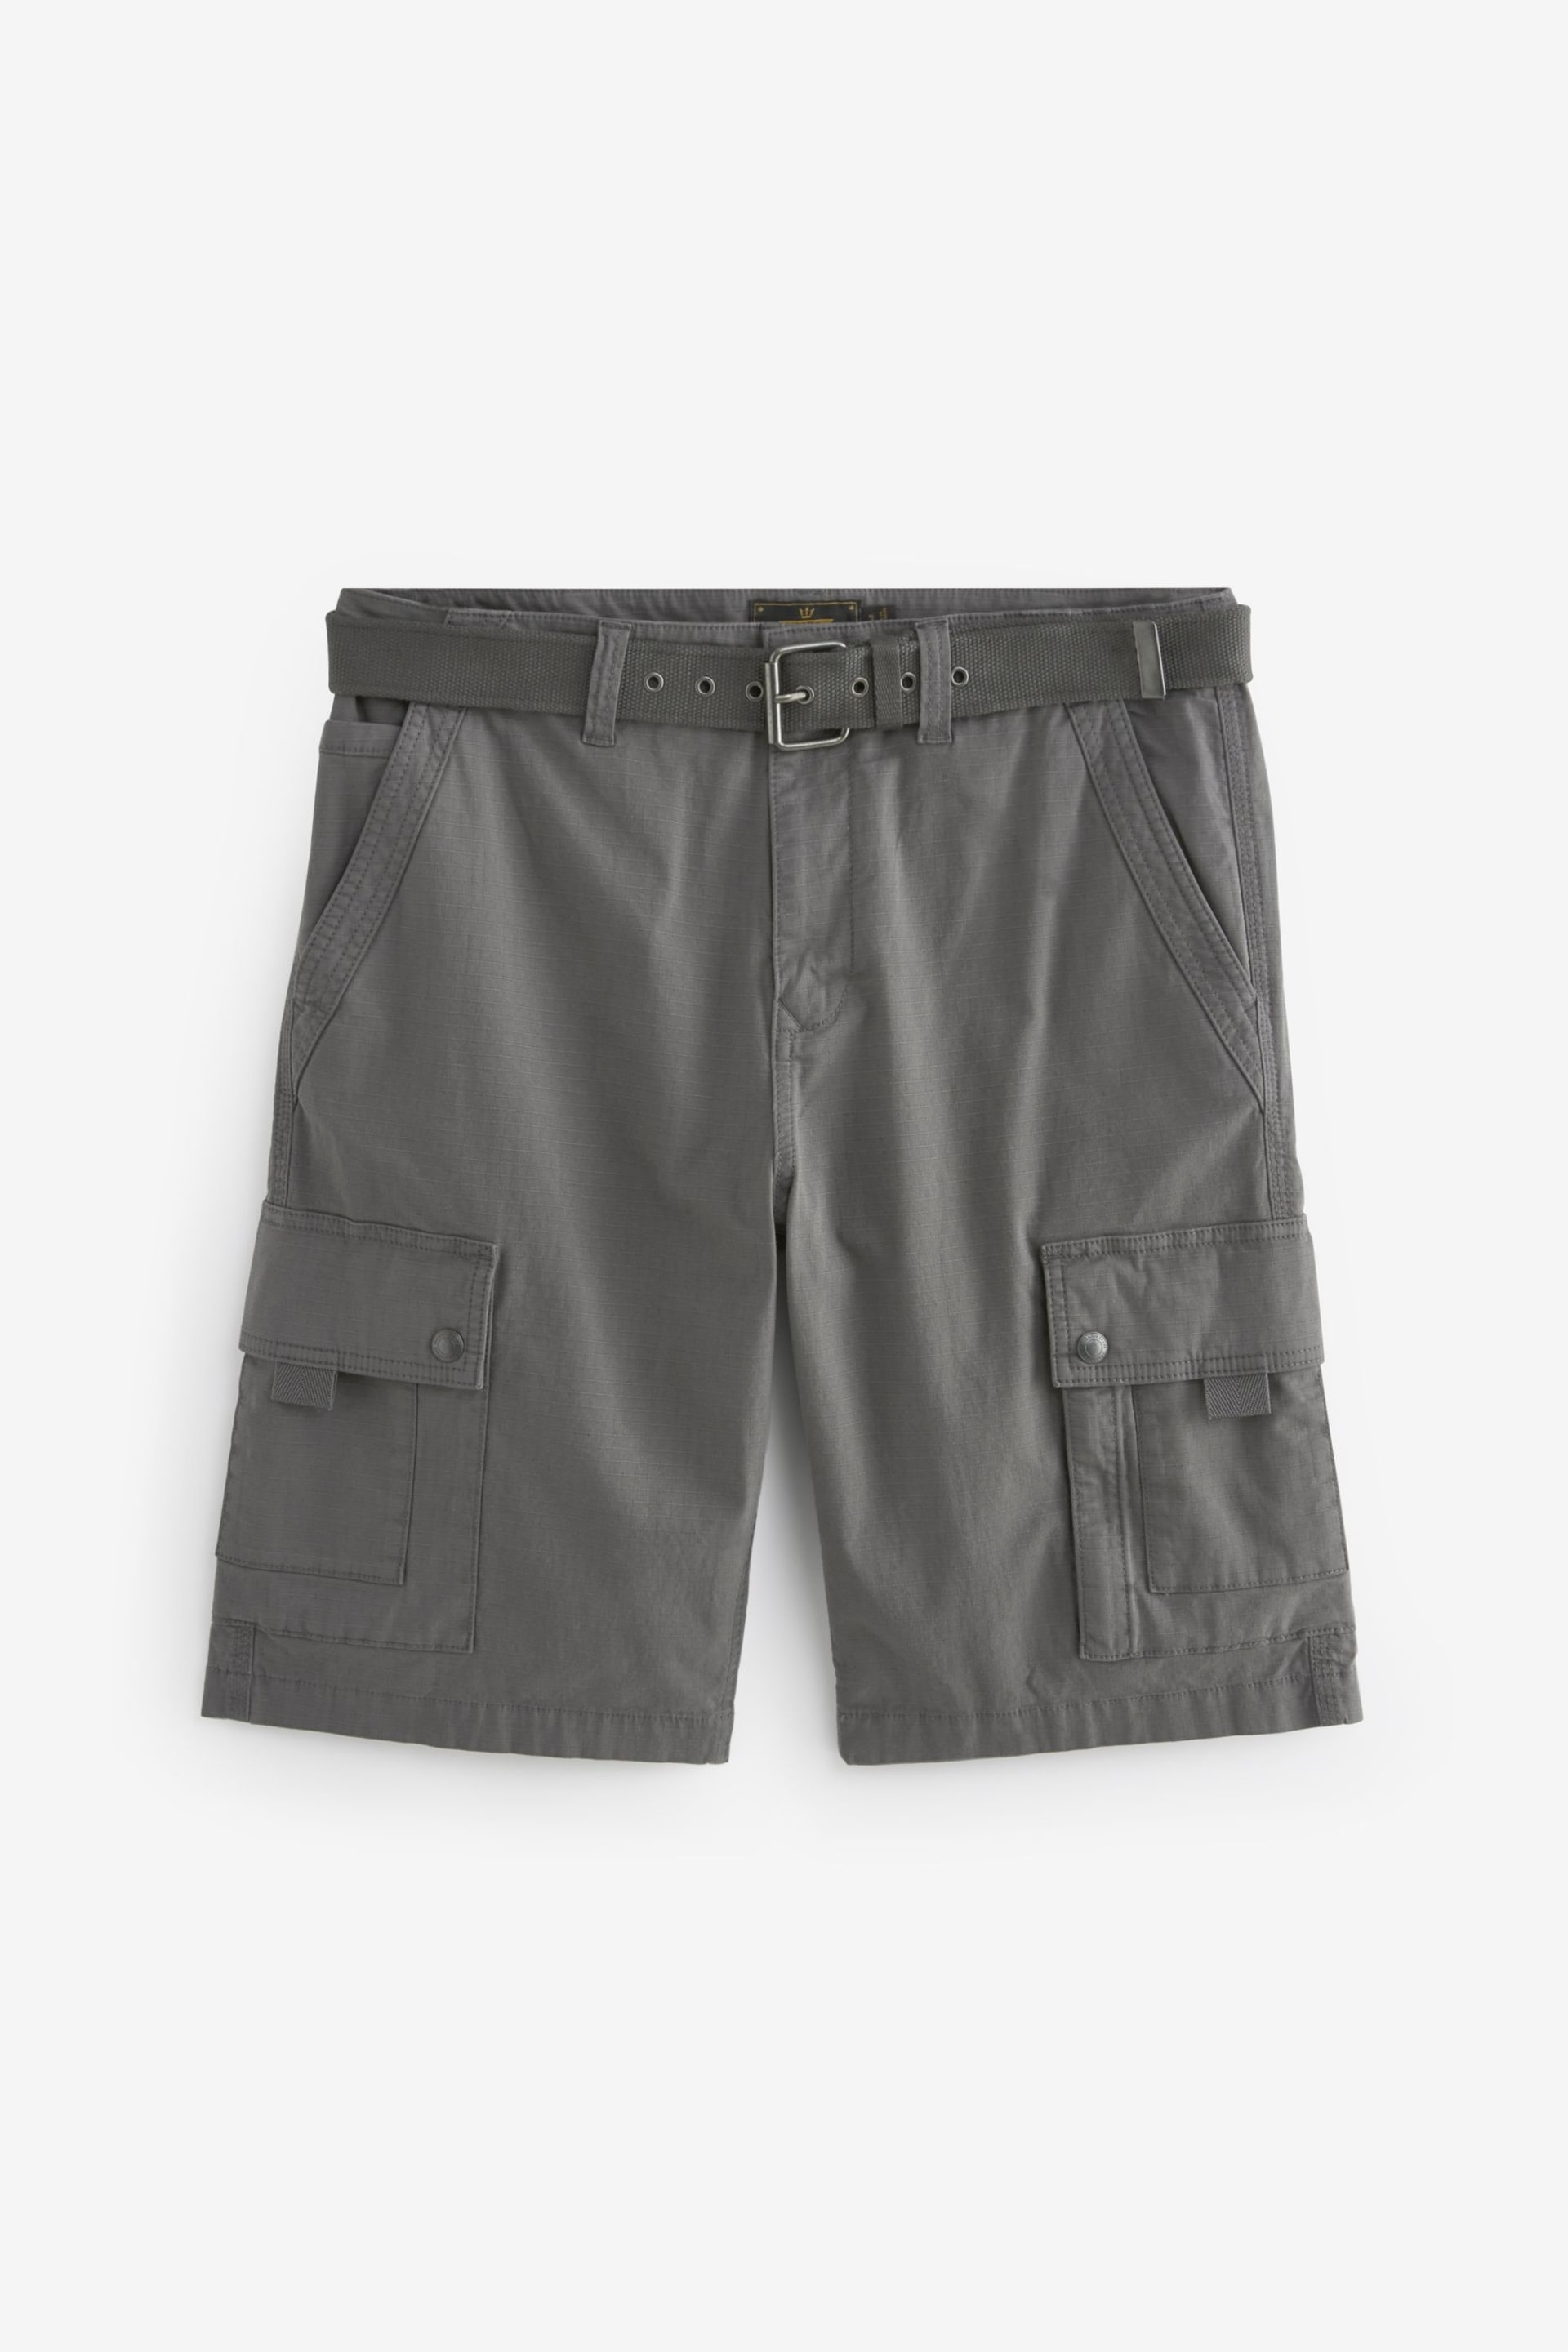 Charcoal Grey Belted Cargo Shorts - Image 7 of 12